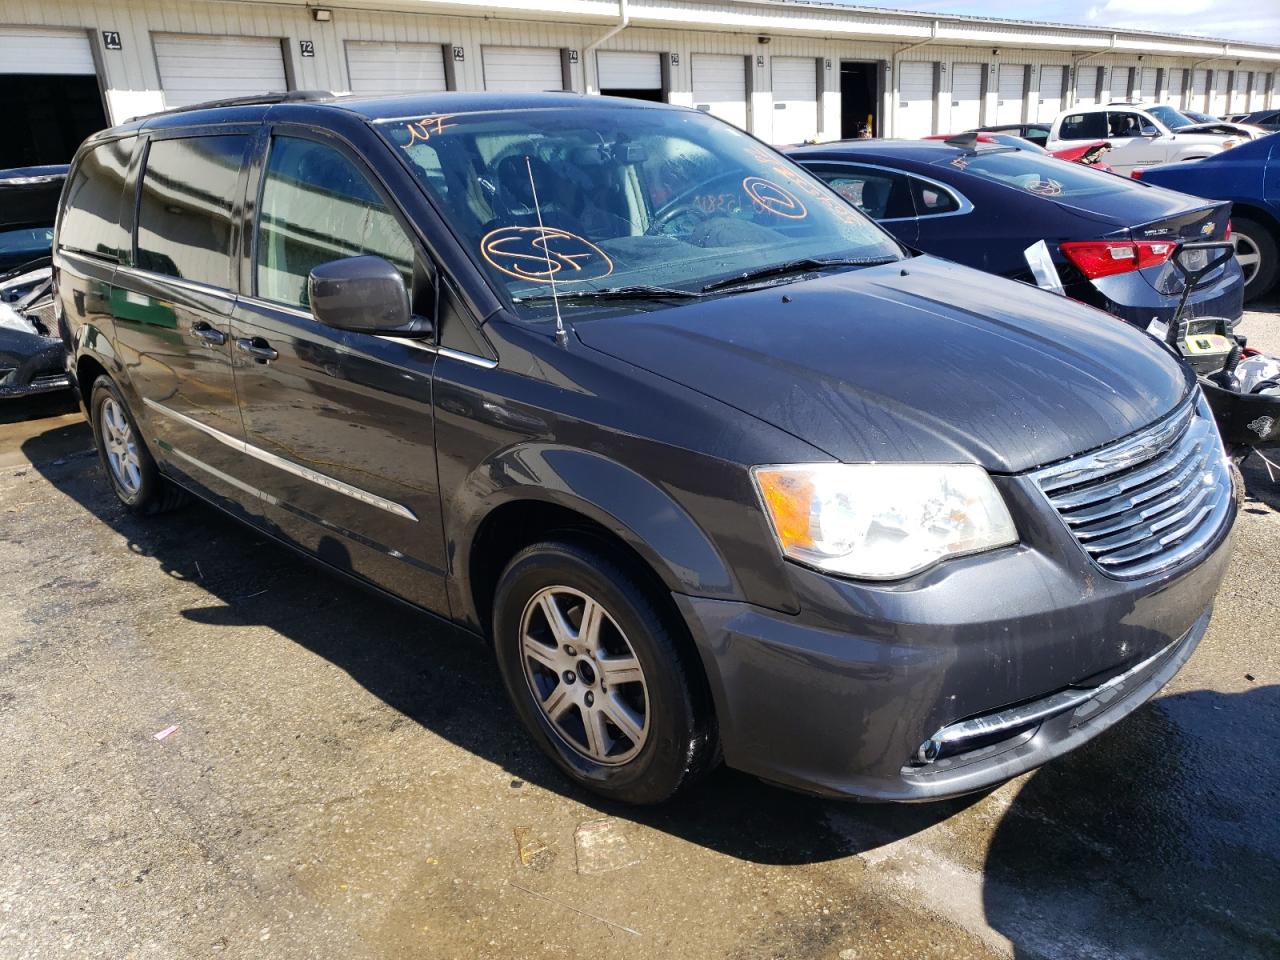 2011 CHRYSLER TOWN & COUNTRY TOURING VIN: 2A4RR5DG6BR719841